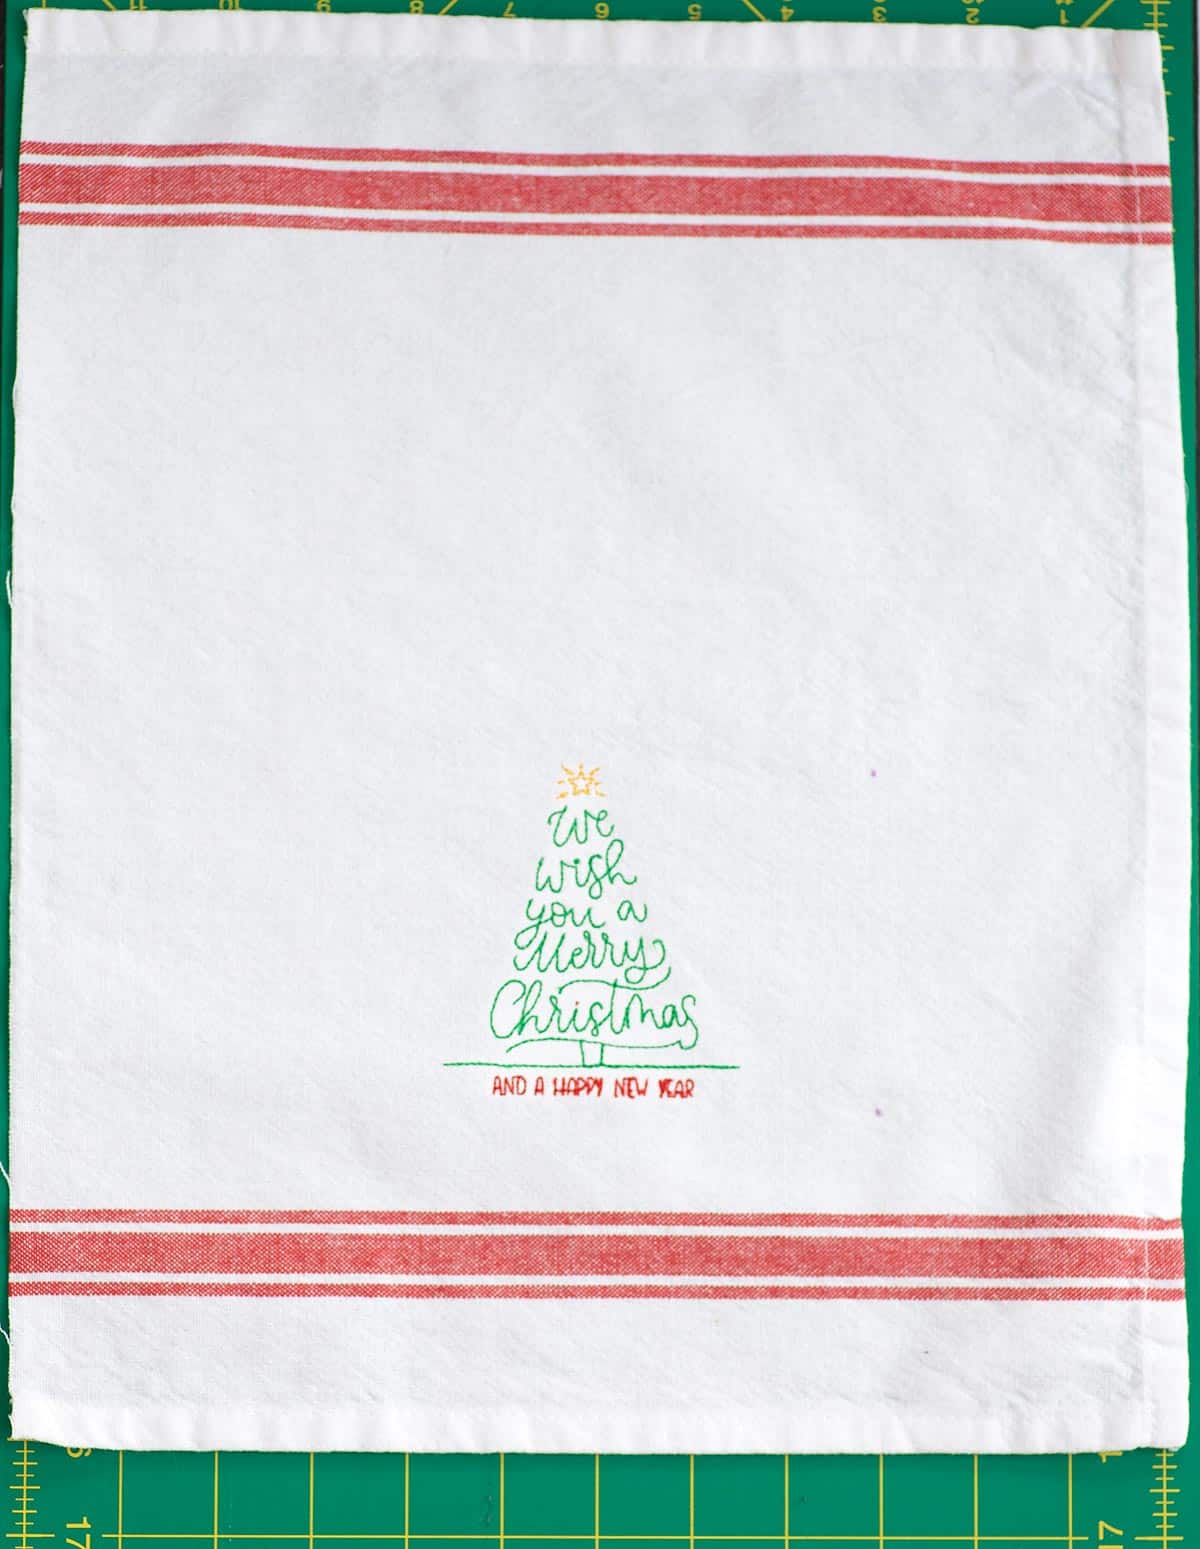 we wish you a merry christmas machine embroidered on half the towel